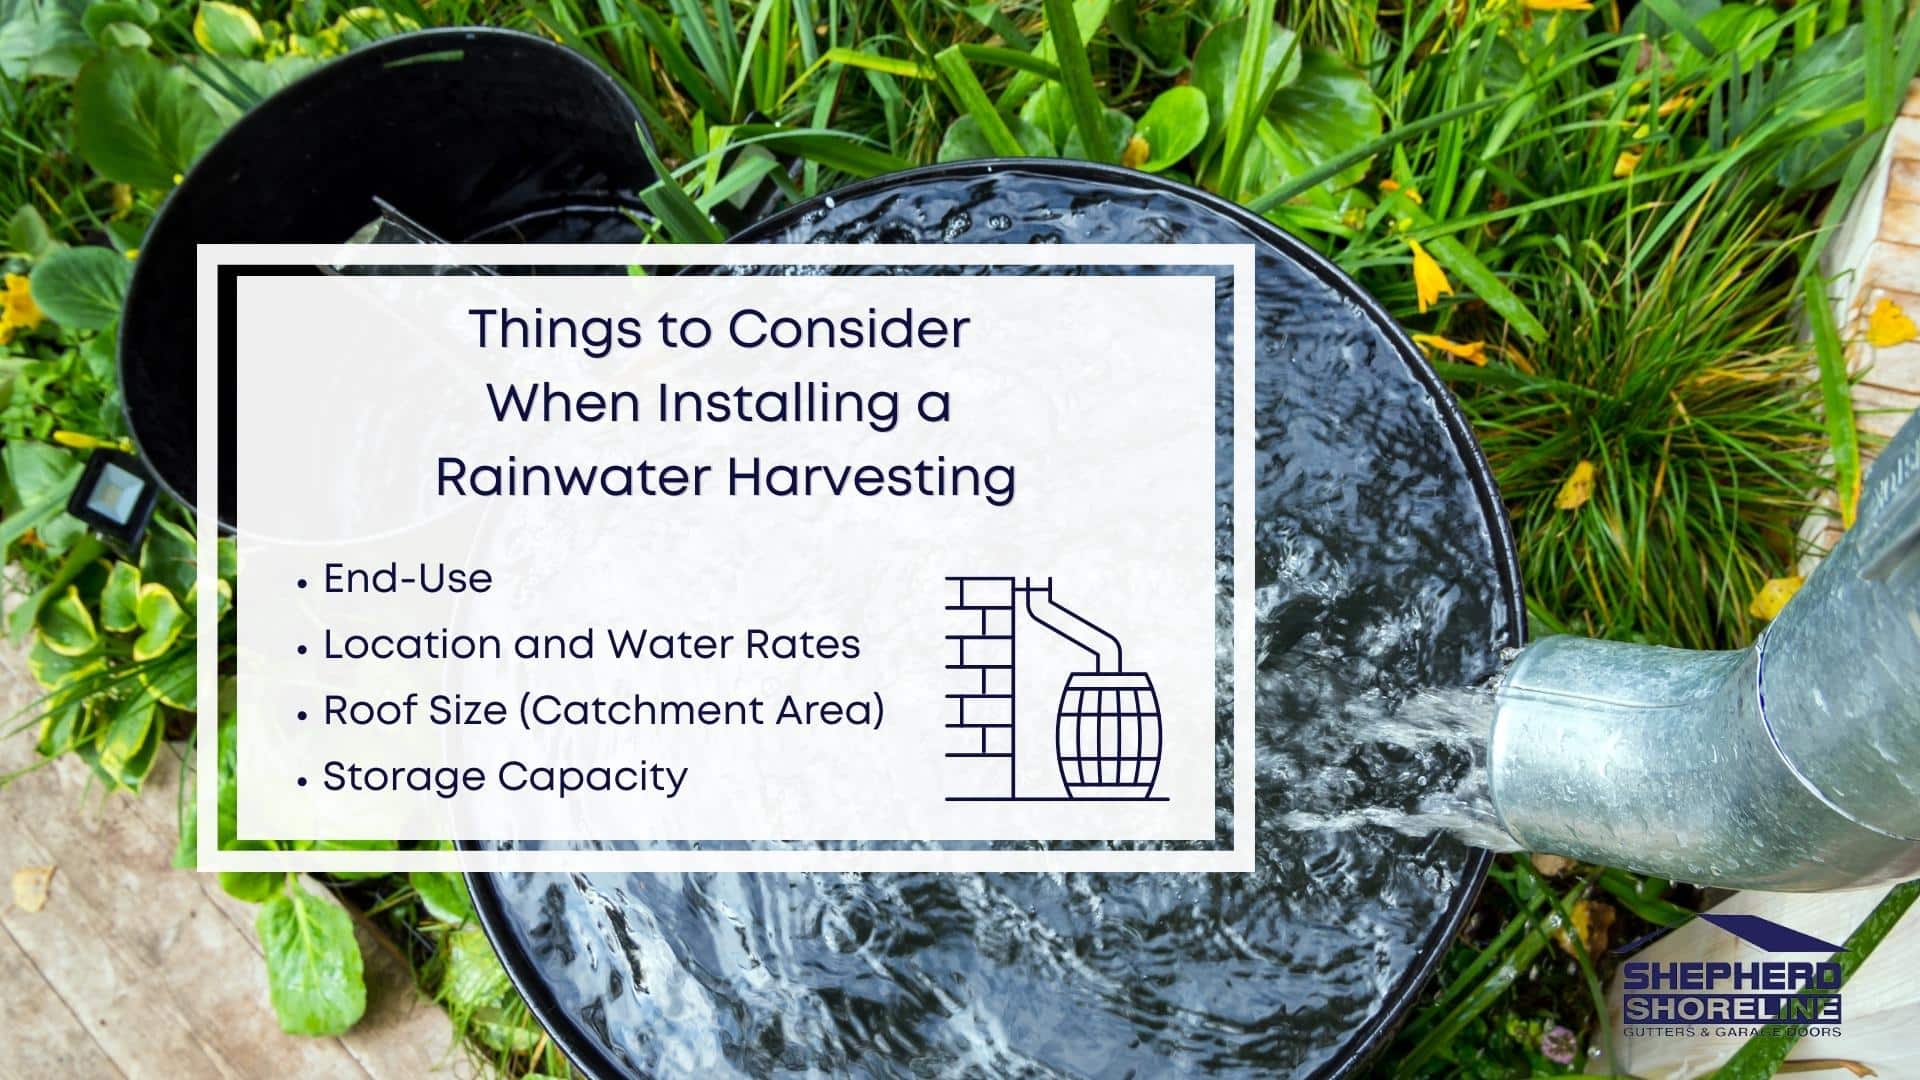 Infographic image of things to consider when installing a rainwater harvesting